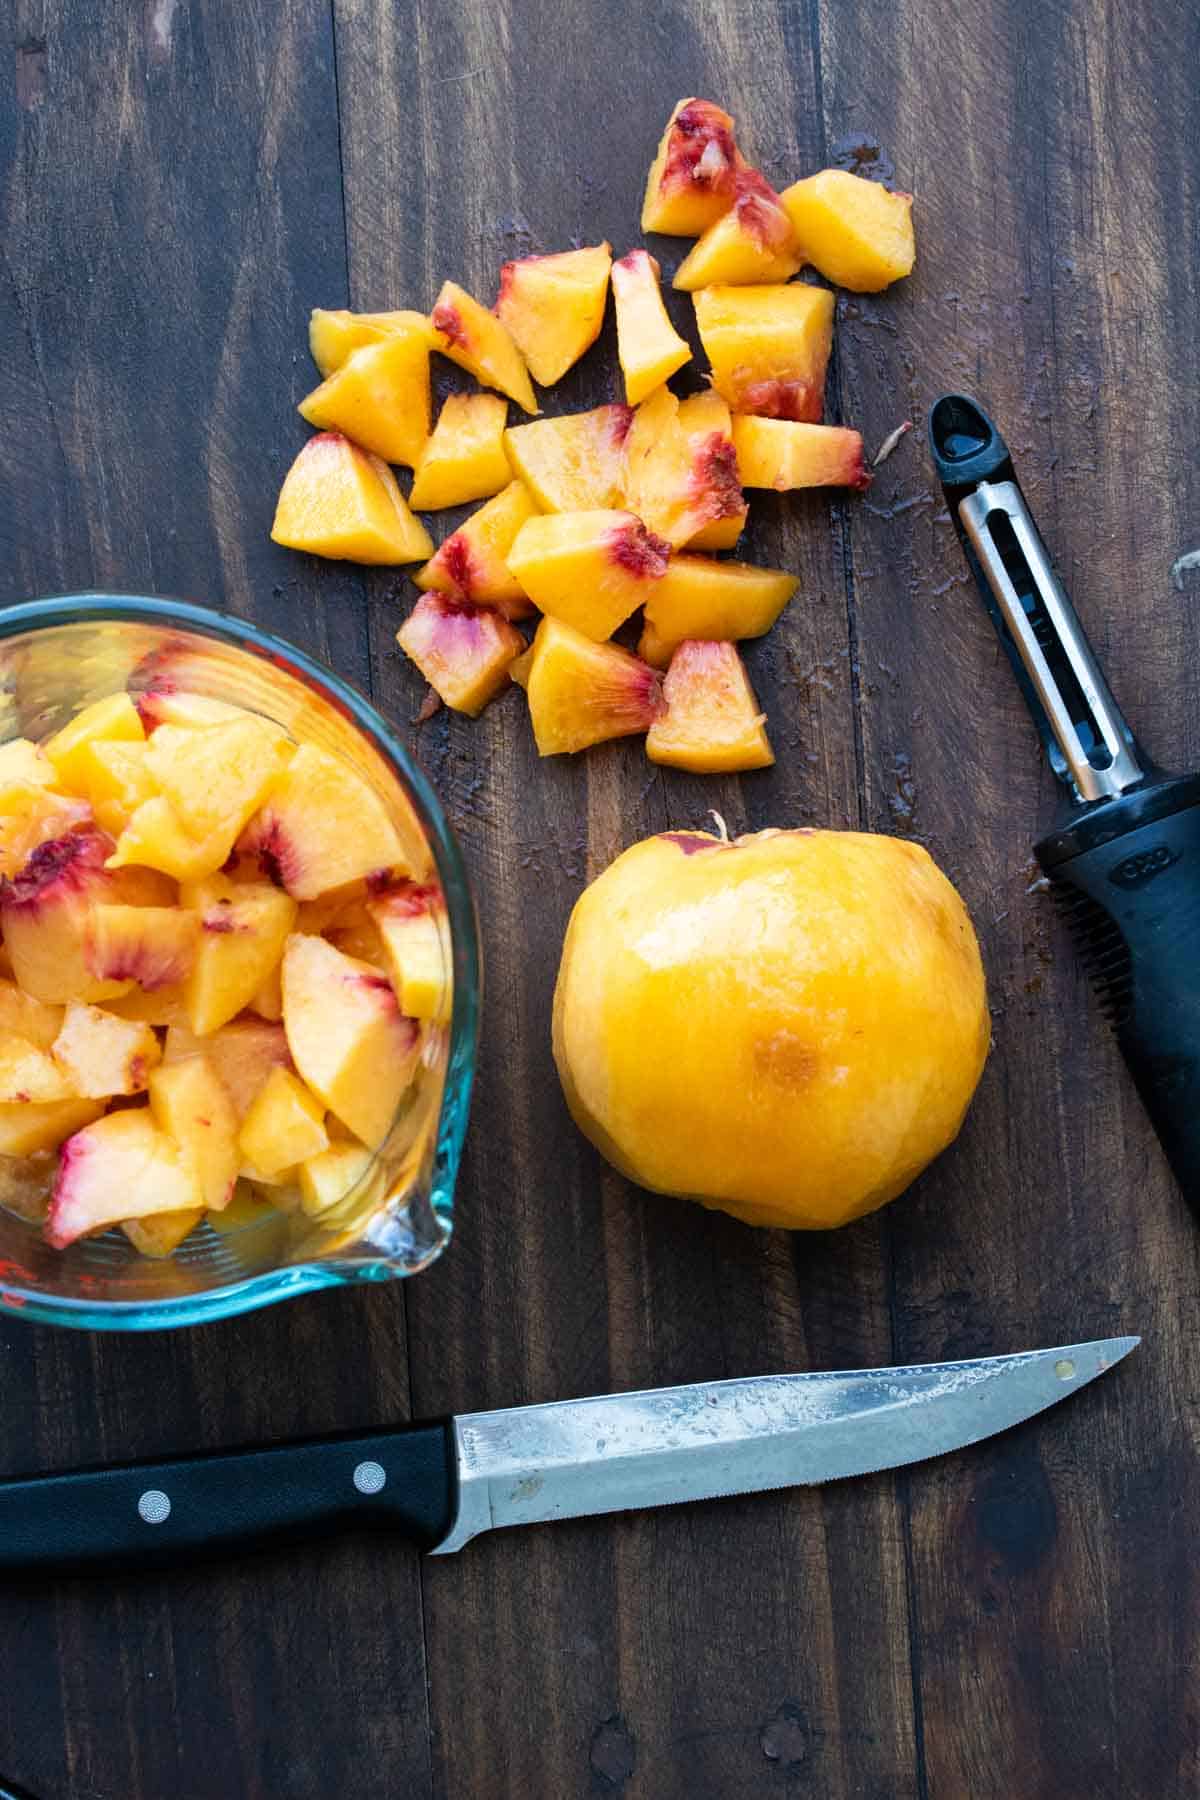 Peach being peeled and chopped into pieces.